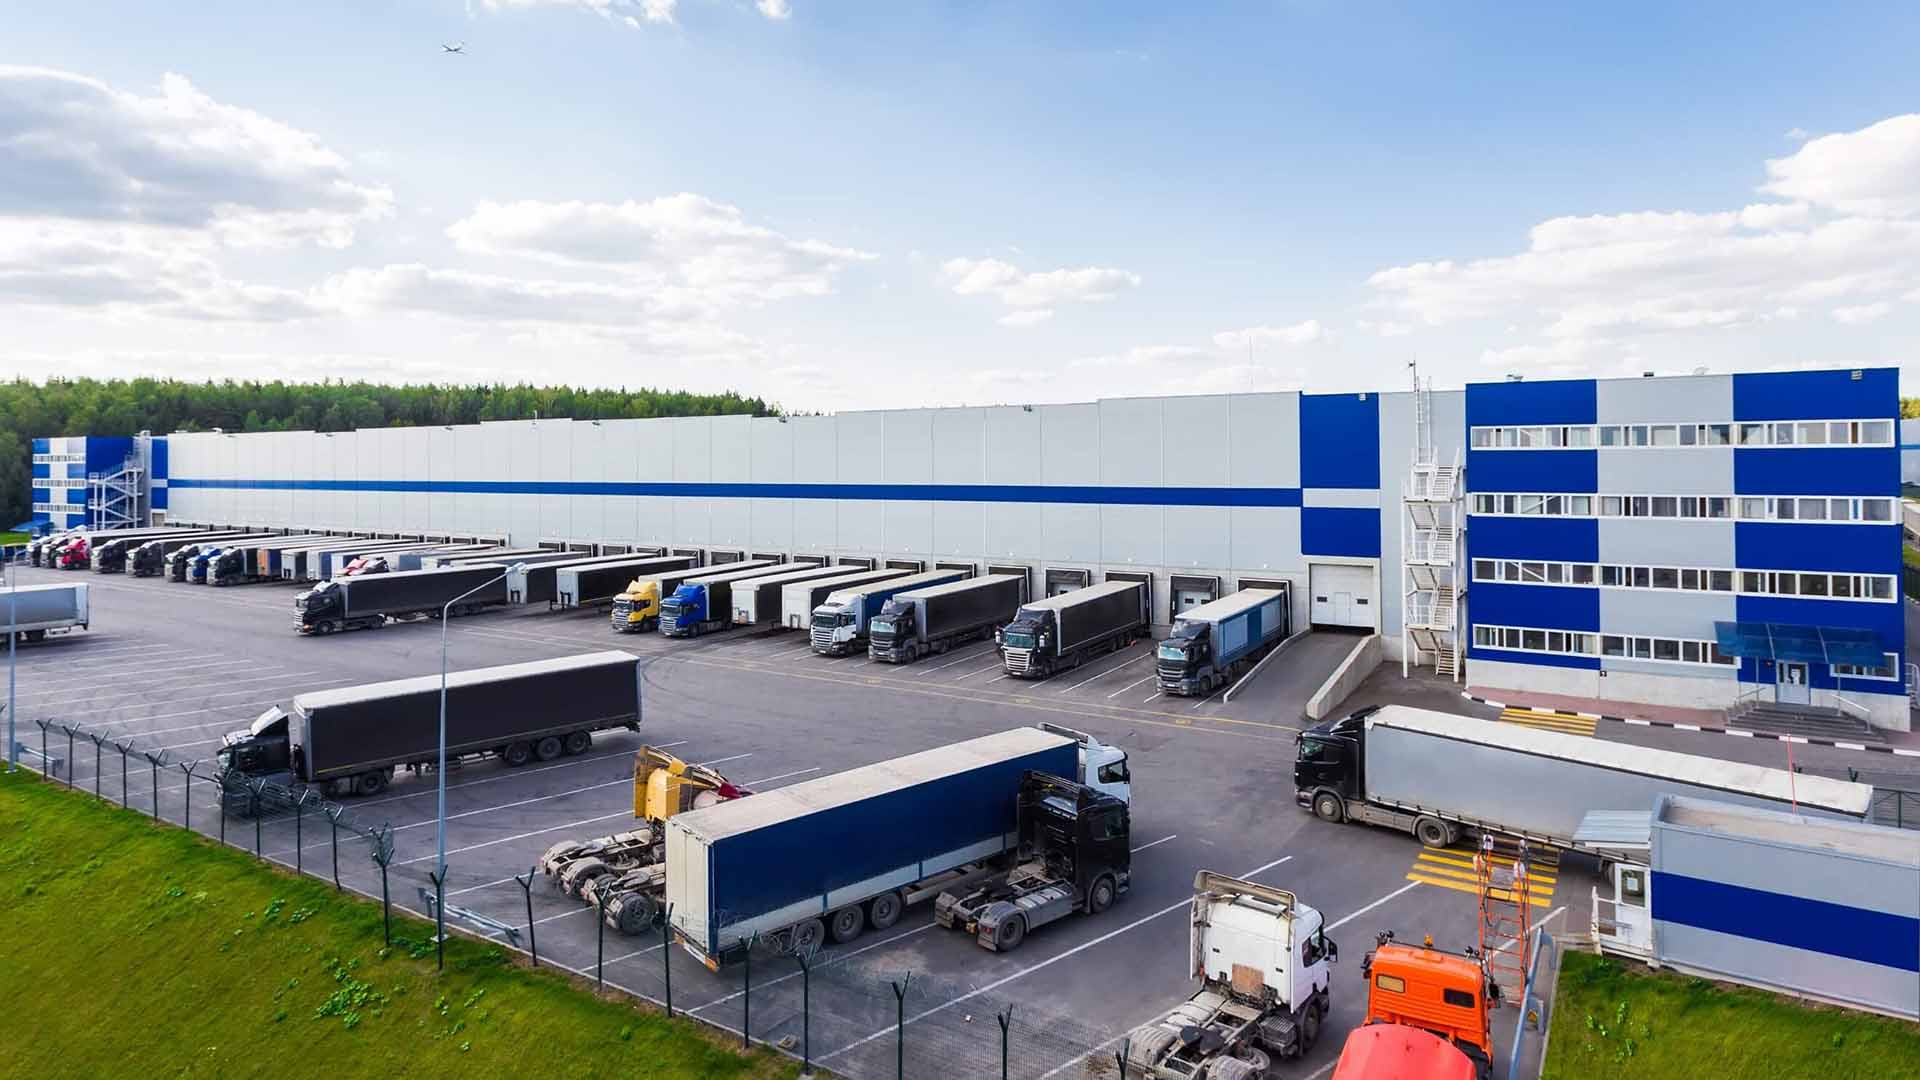 A distribution center with lots of docks and trucks